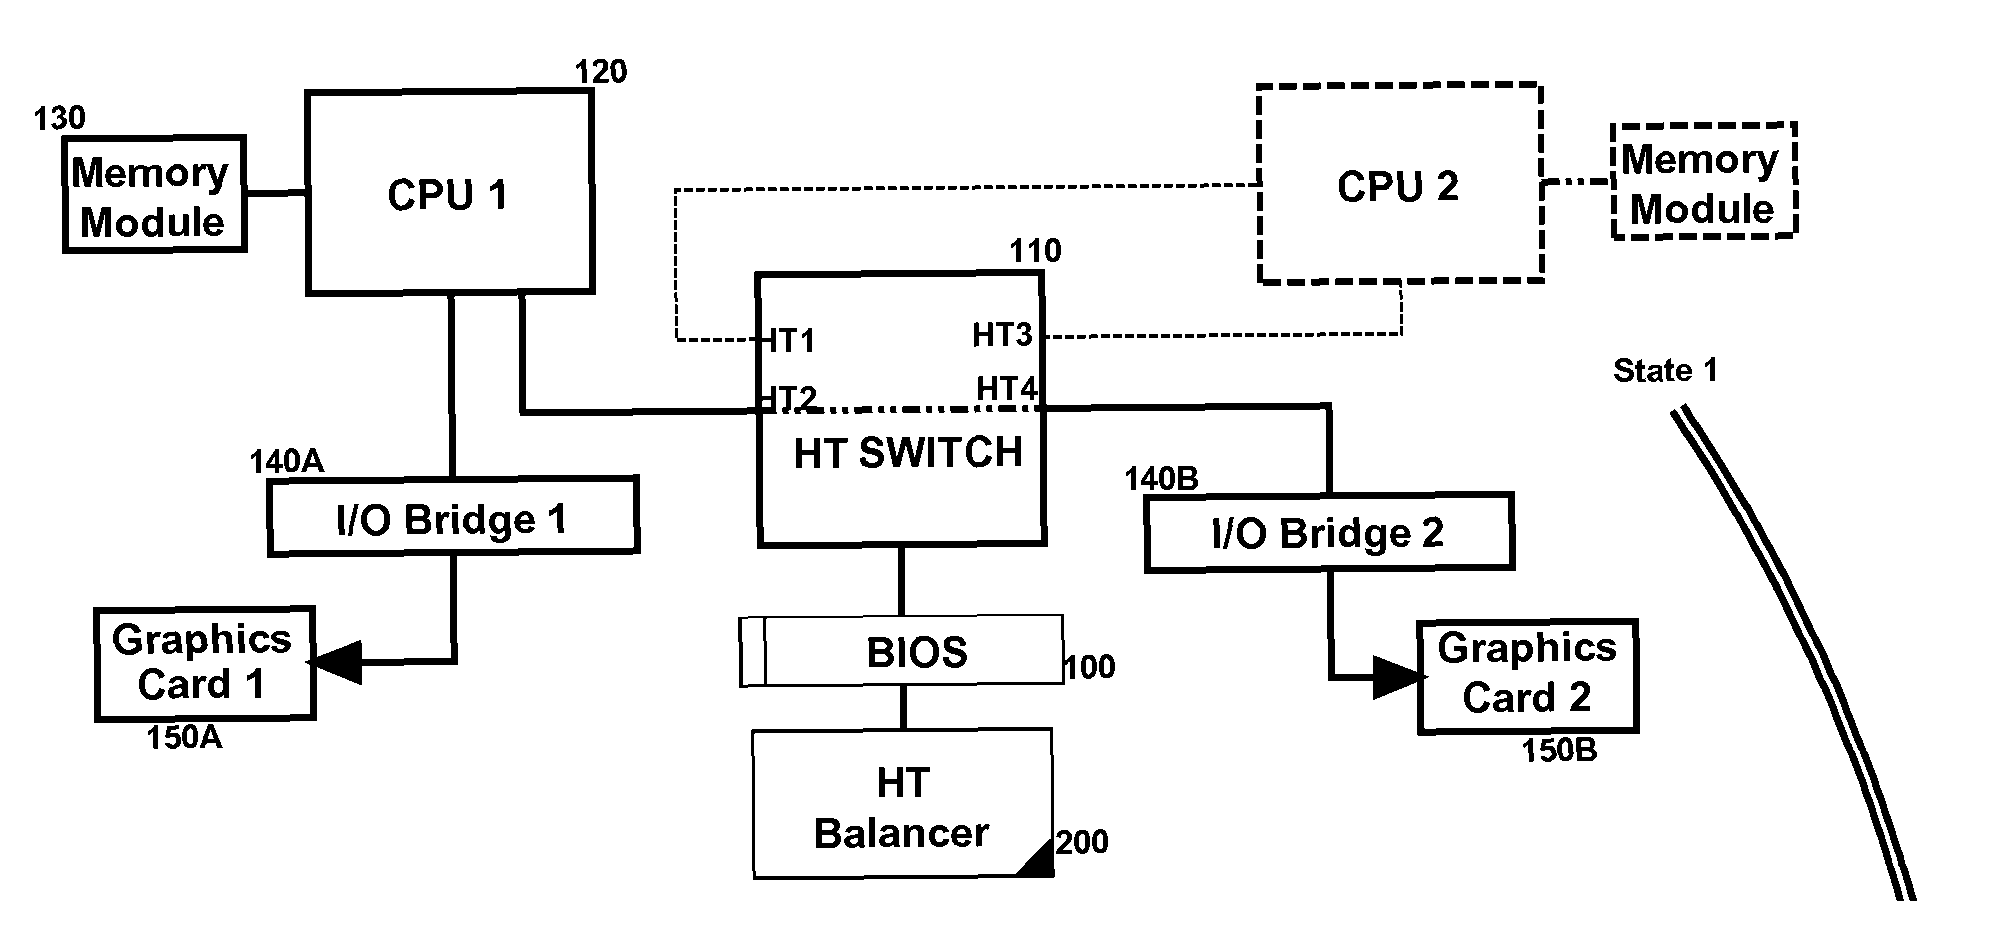 Flexibly configurable multi central processing unit (CPU) supported hypertransport switching